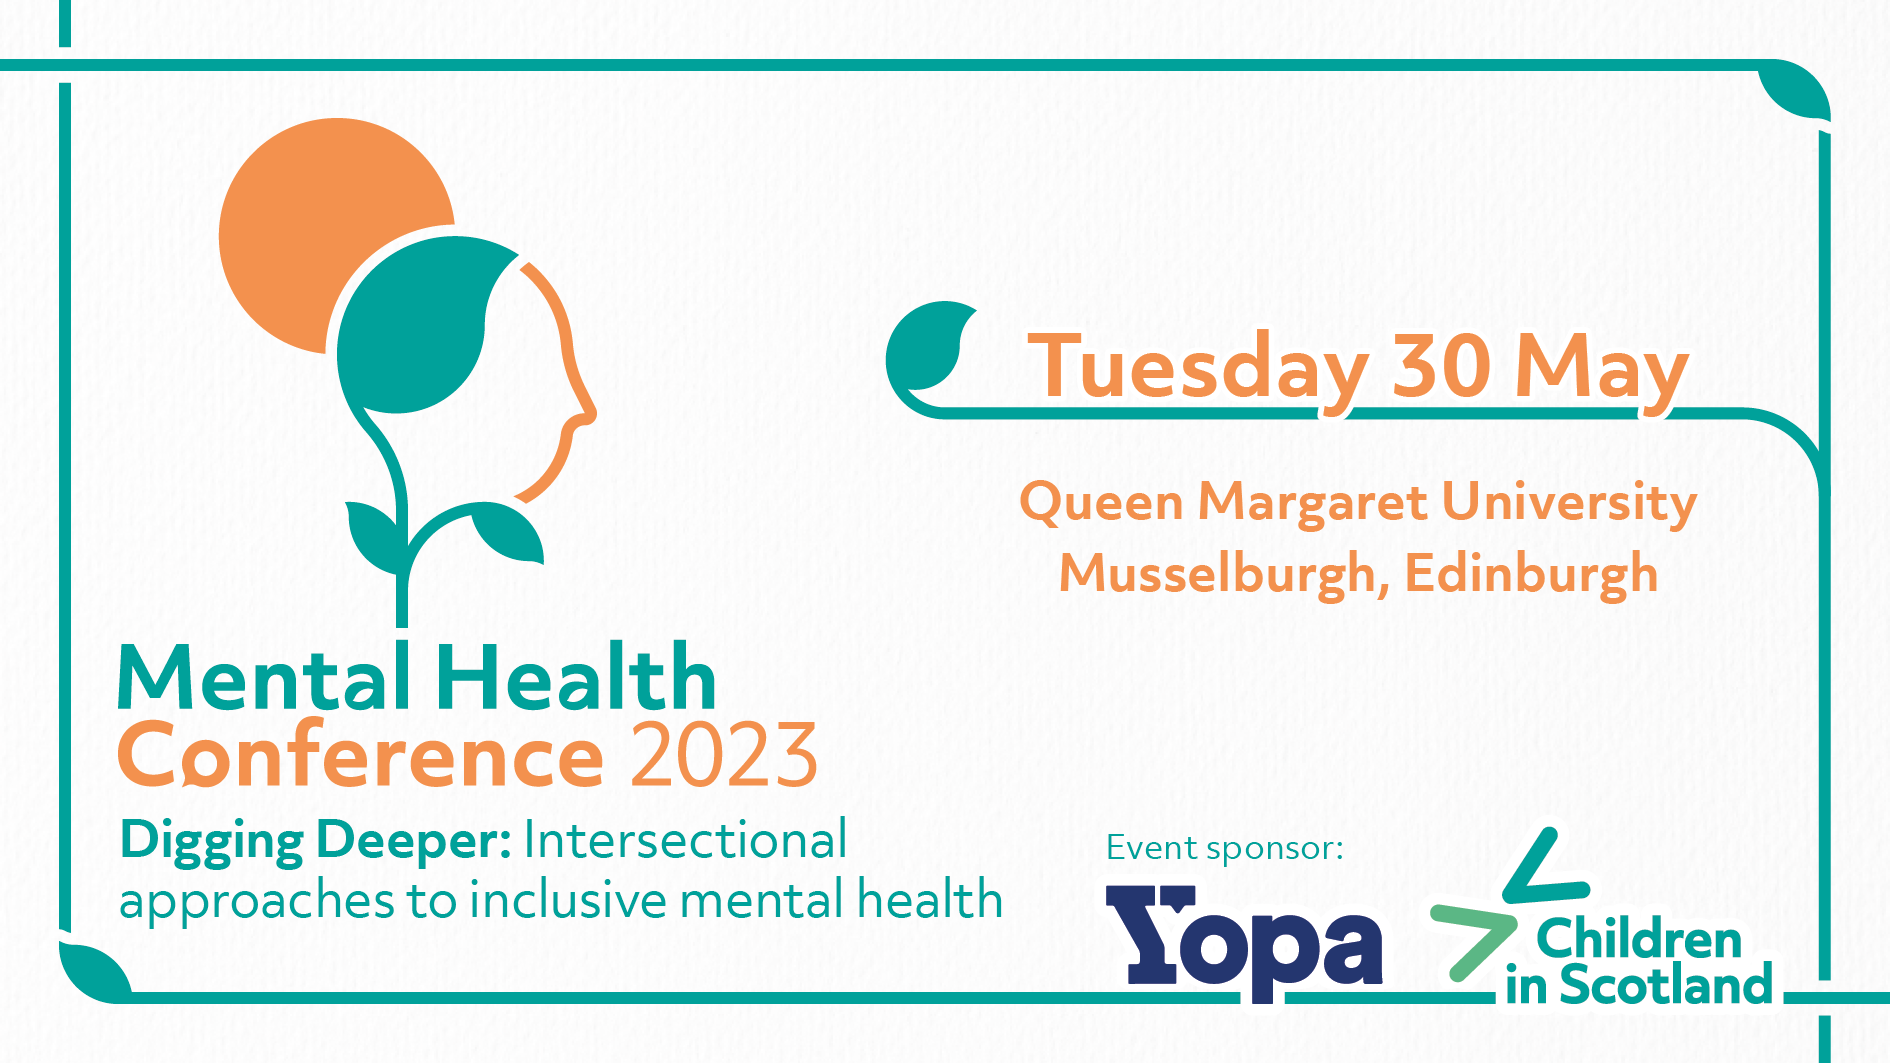 Mental Health Conference 2023: Digging deeper: intersectional approaches to inclusive mental health. Tuesday 30 May, Queen Margaret University Musselburgh, Edinburgh. Logo is the outline of a head in profile with a sun behind it, outline of head is in a leaf motif to symbolise growth.